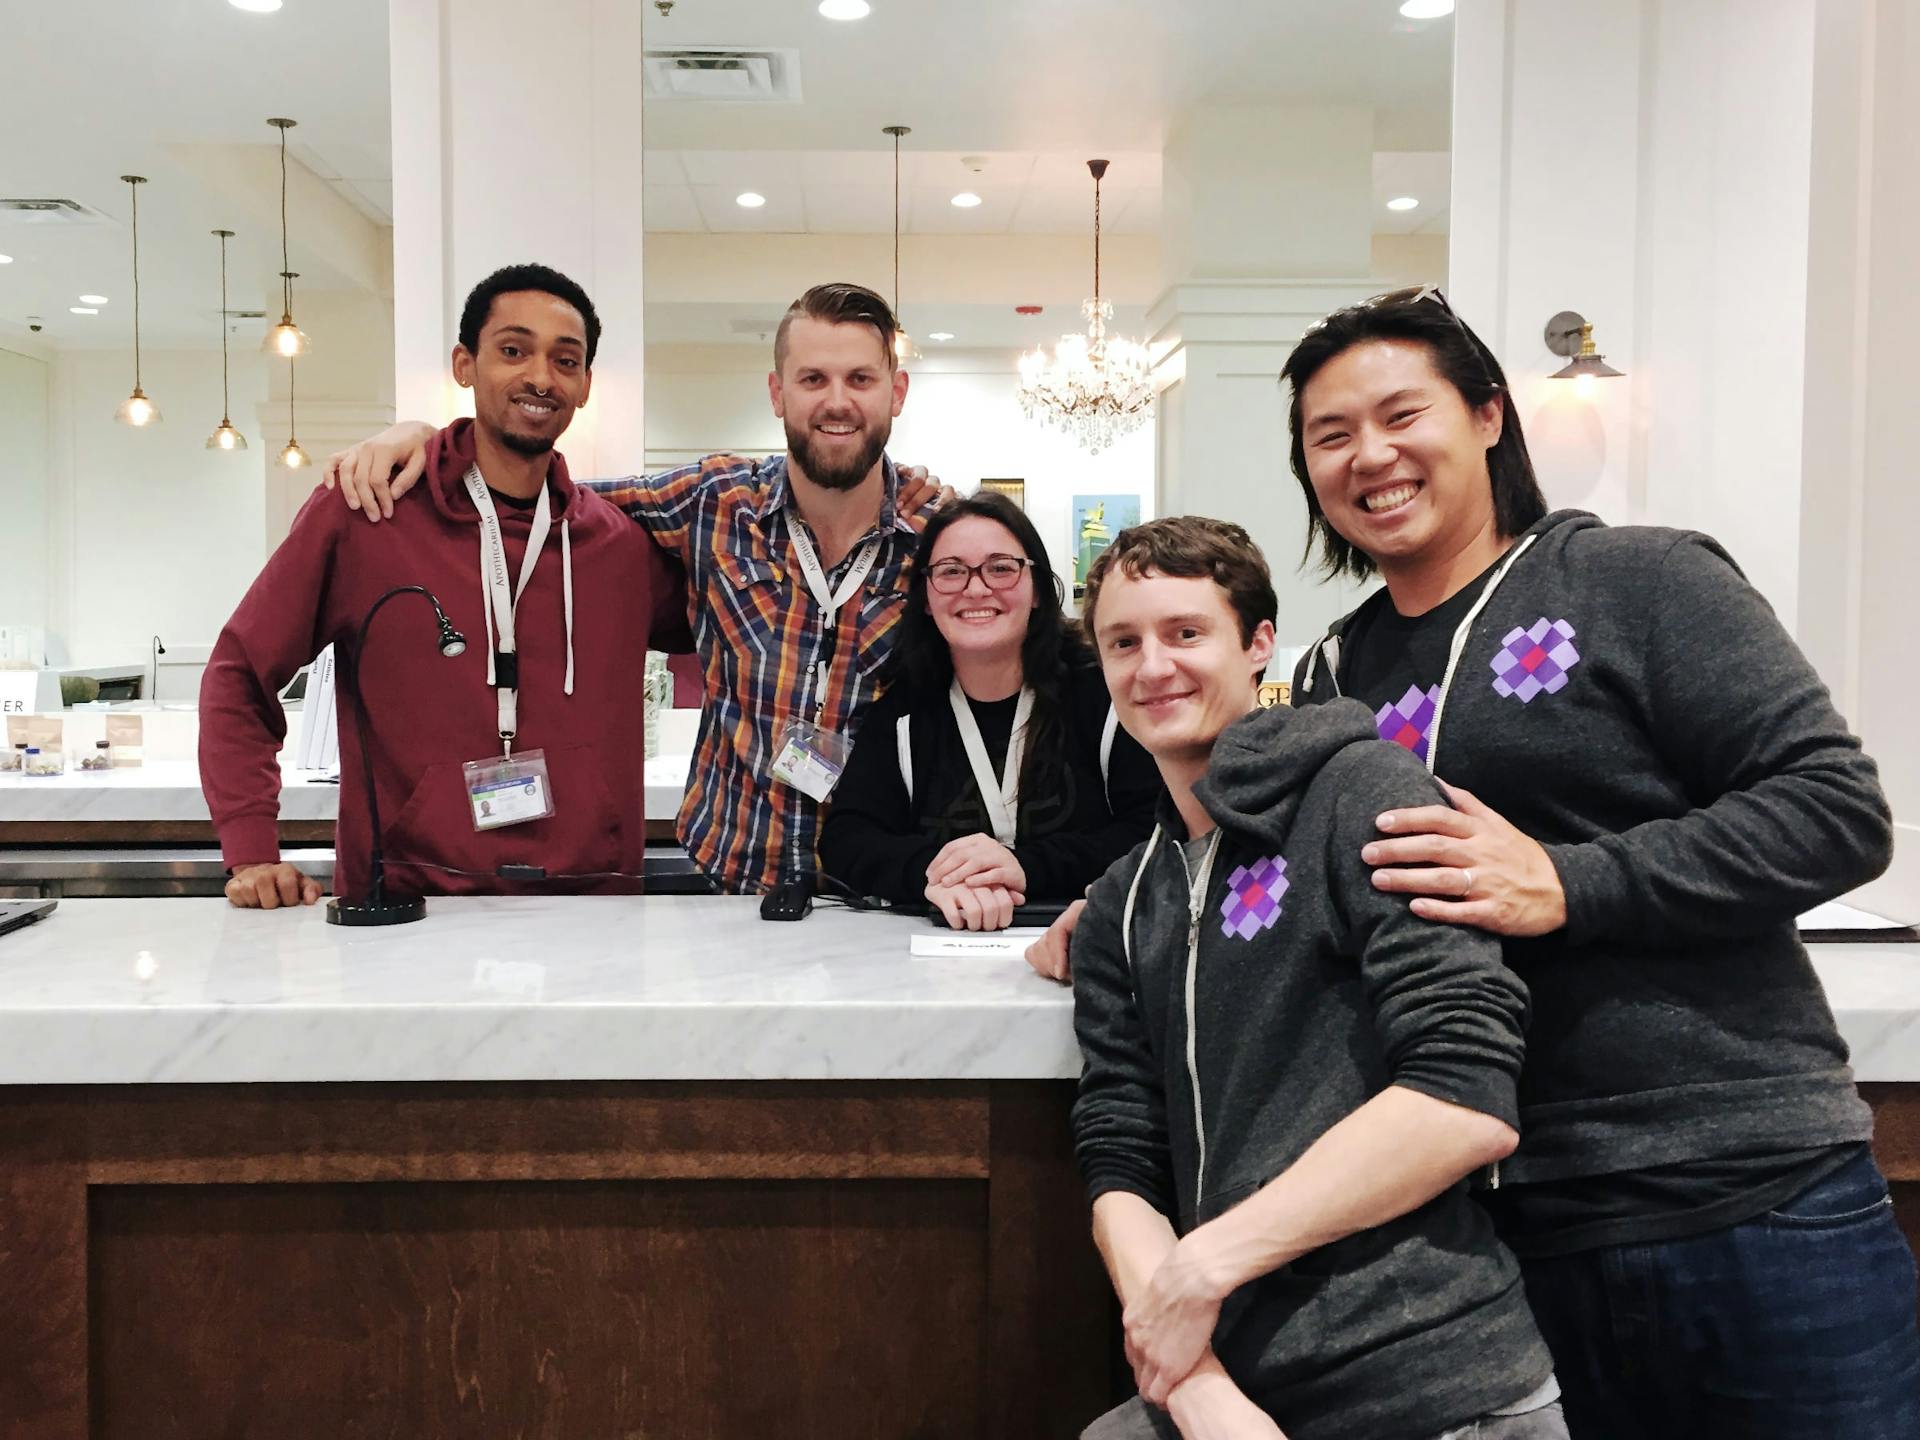 Meadow employees pose with dispensary employees at a marble counter